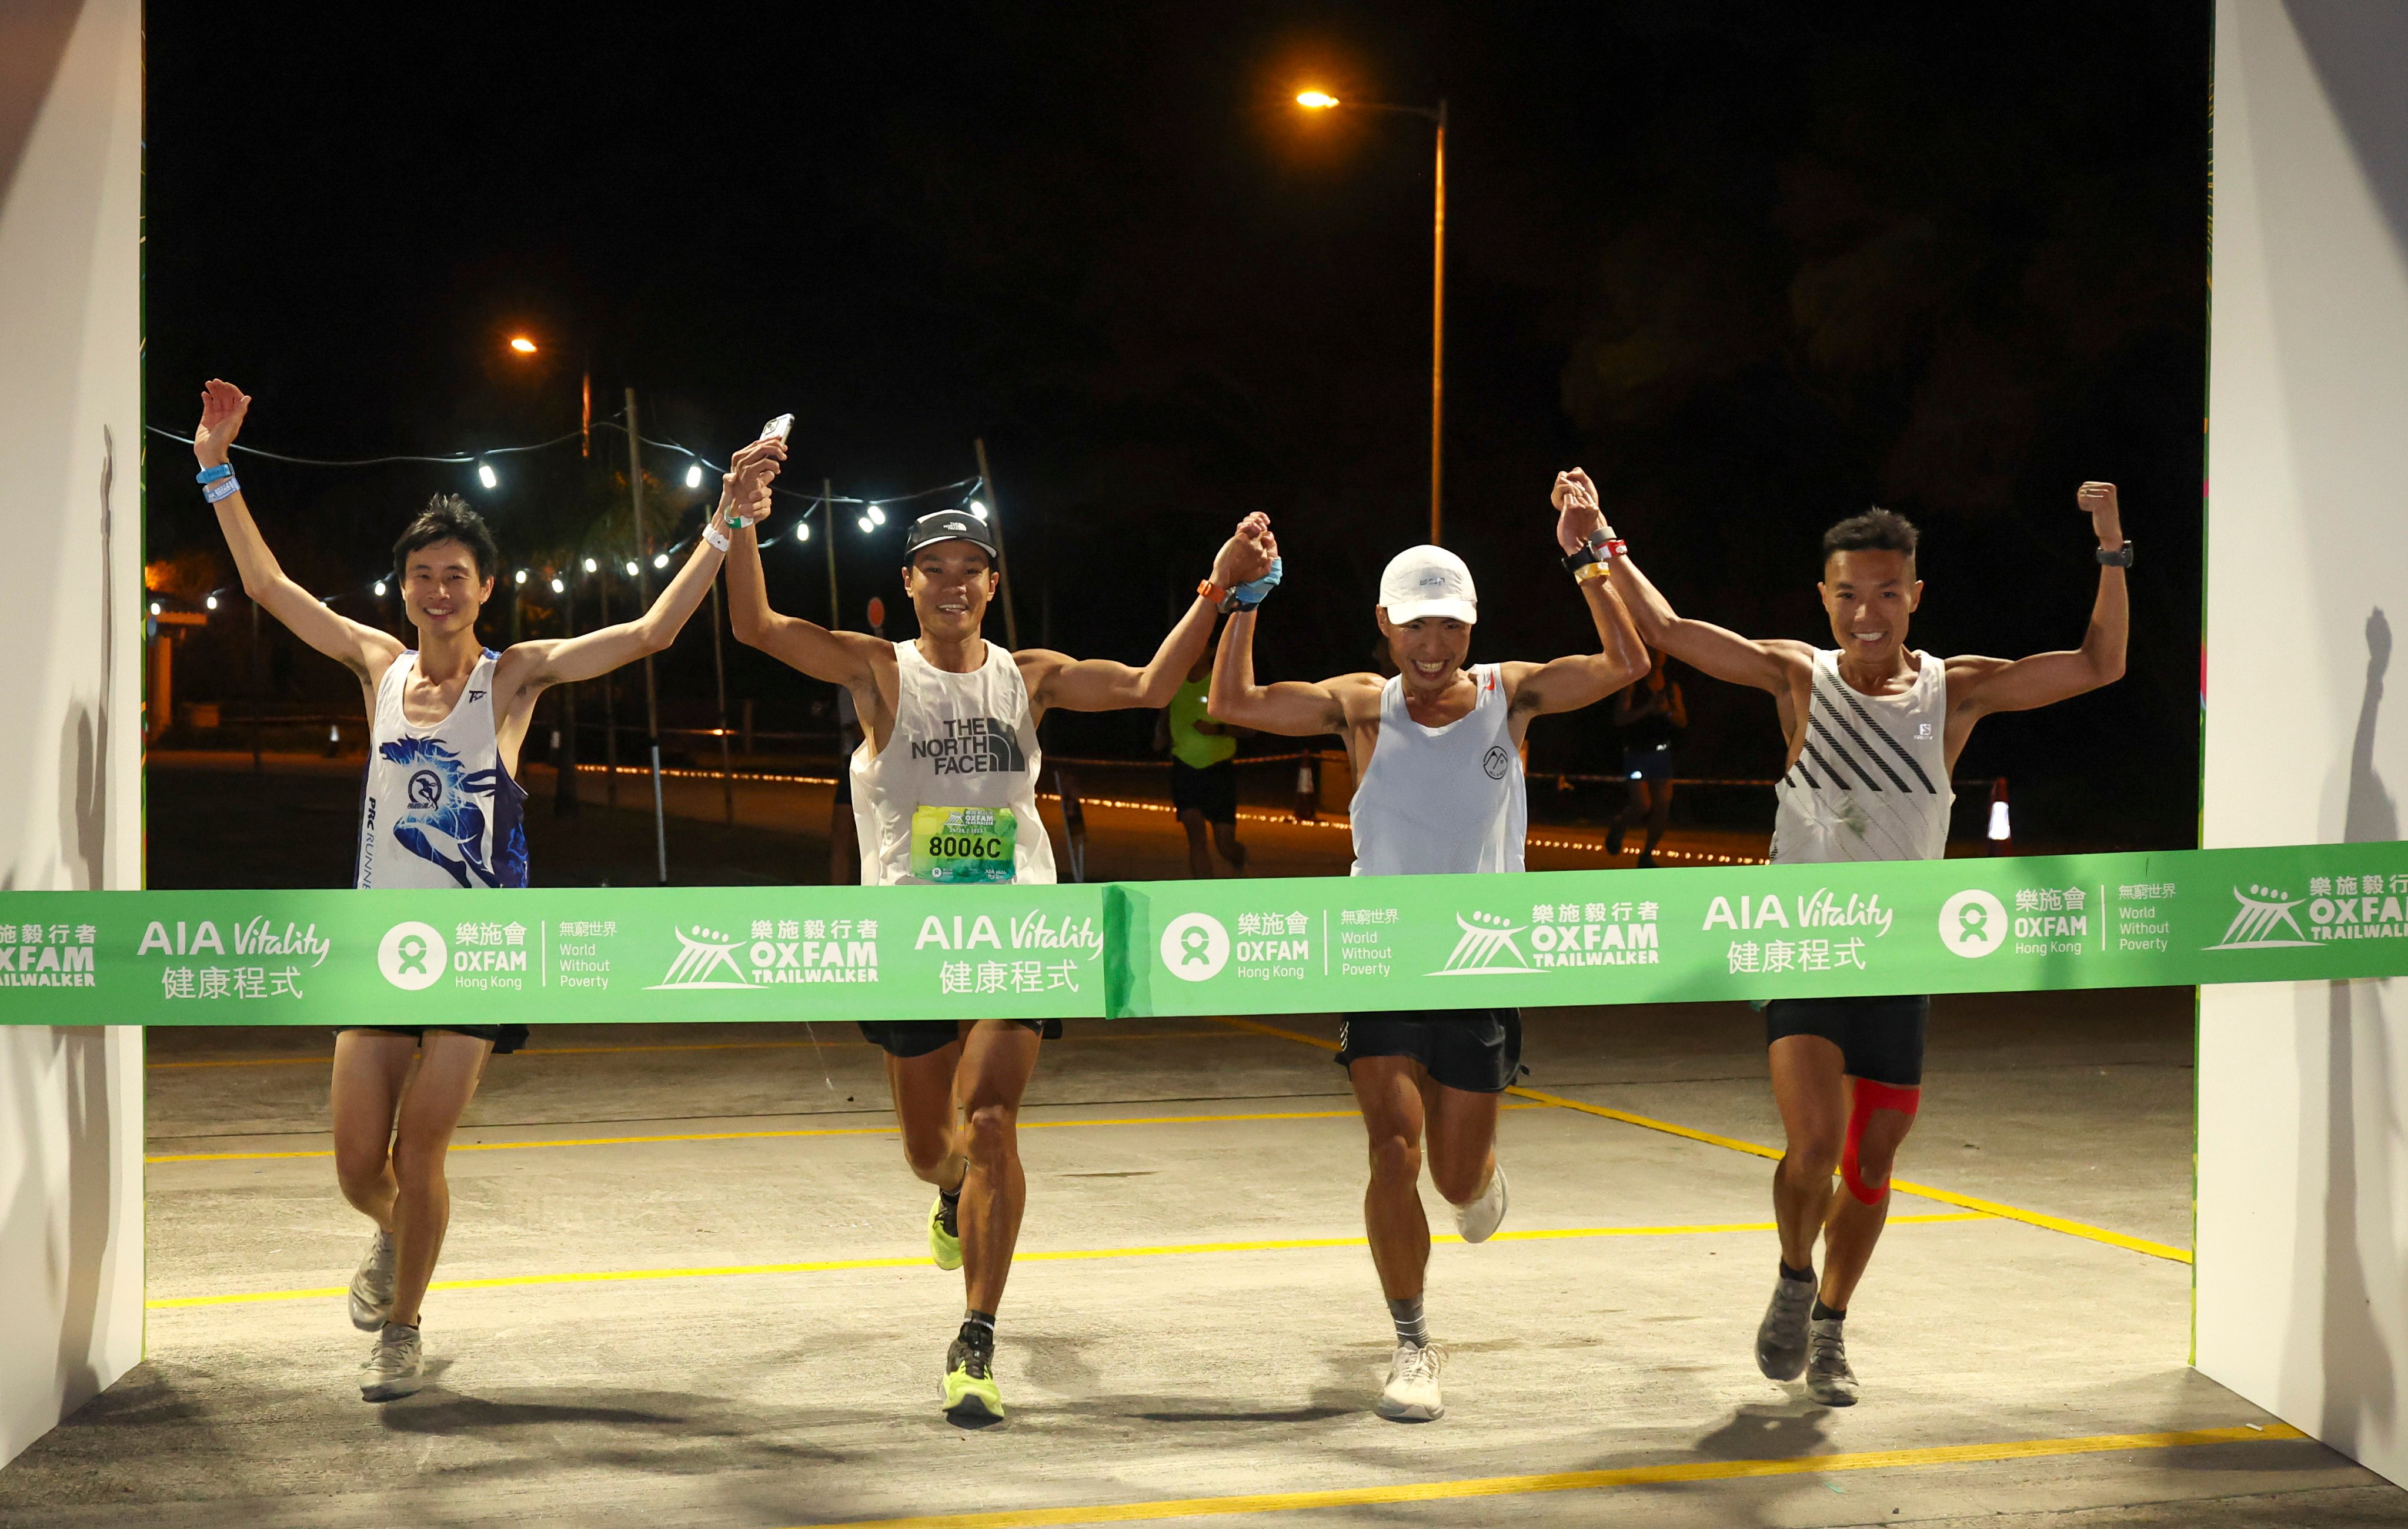 From left to right, Woody Wu Man-tsung, Wong Ho-chung; Tsang Fuk-cheung and Joseph Yeung of Team 8006, first finish the 2023 Oxfam Trailwalker in 11 hours and 38 minutes at Yuen Long. Photo: Edmond So